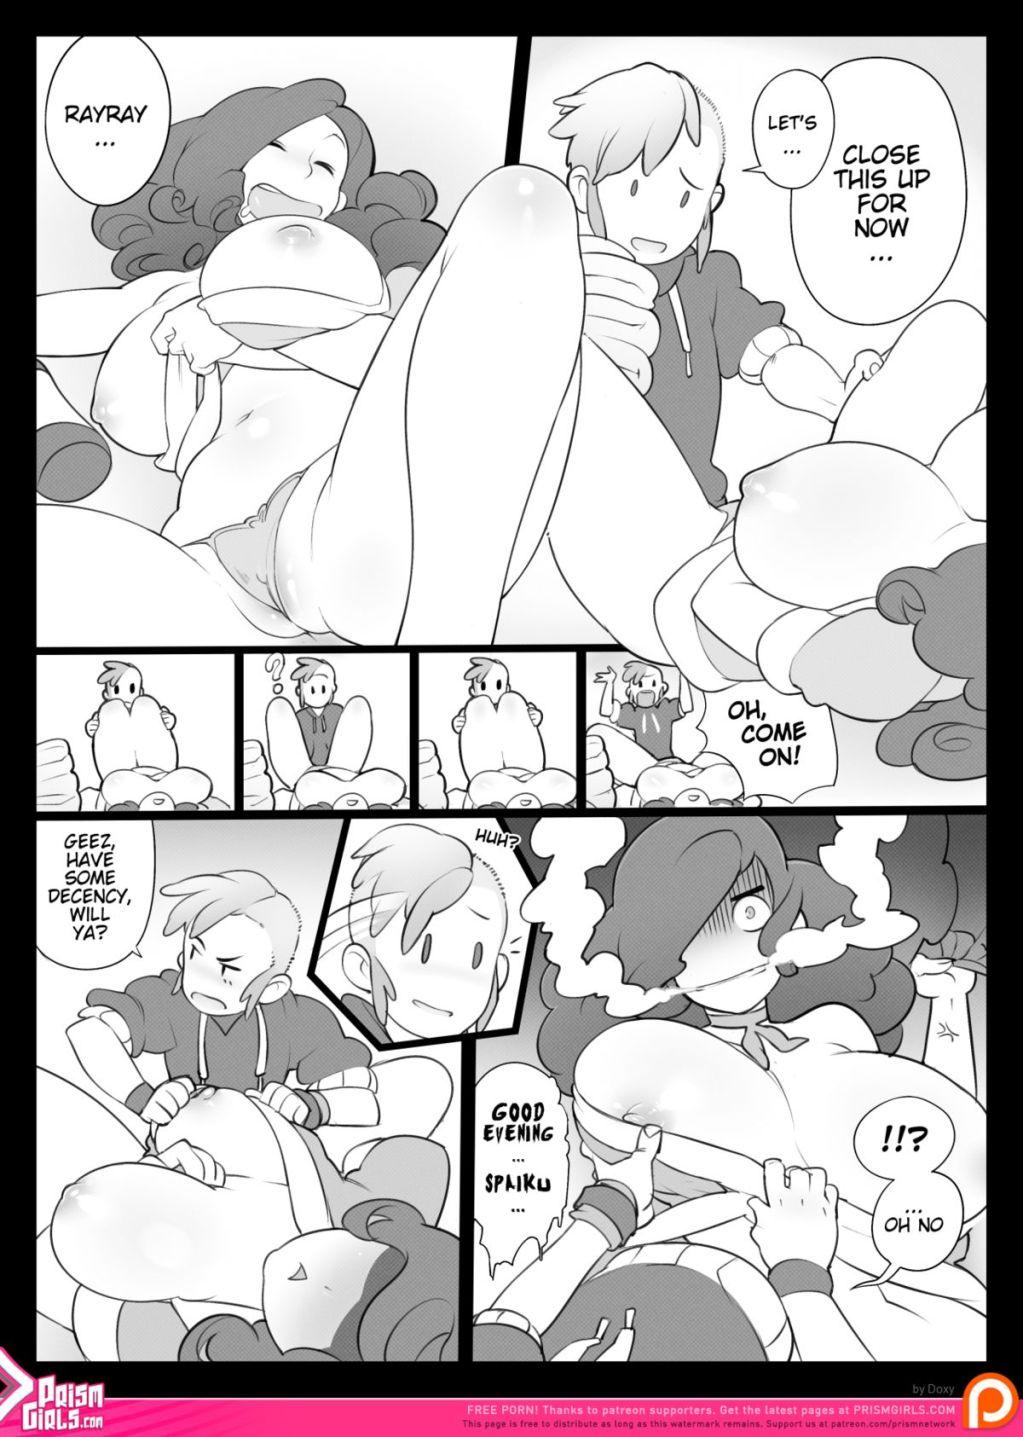 Bigbooty In a Pinch! Latino - Page 2